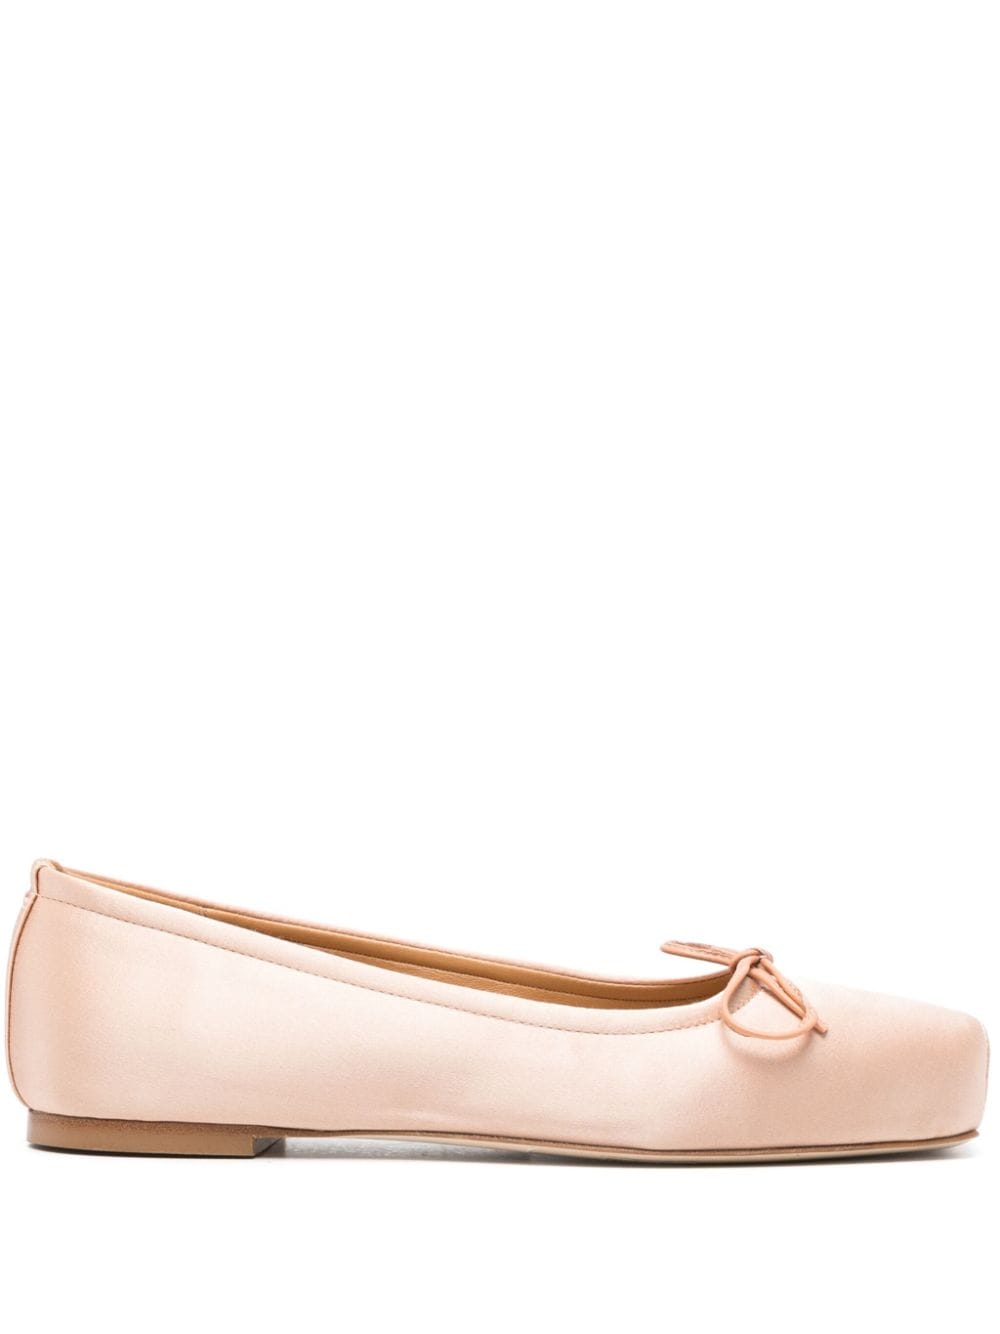 Aeyde square-toe satin ballerina shoes - Pink von Aeyde